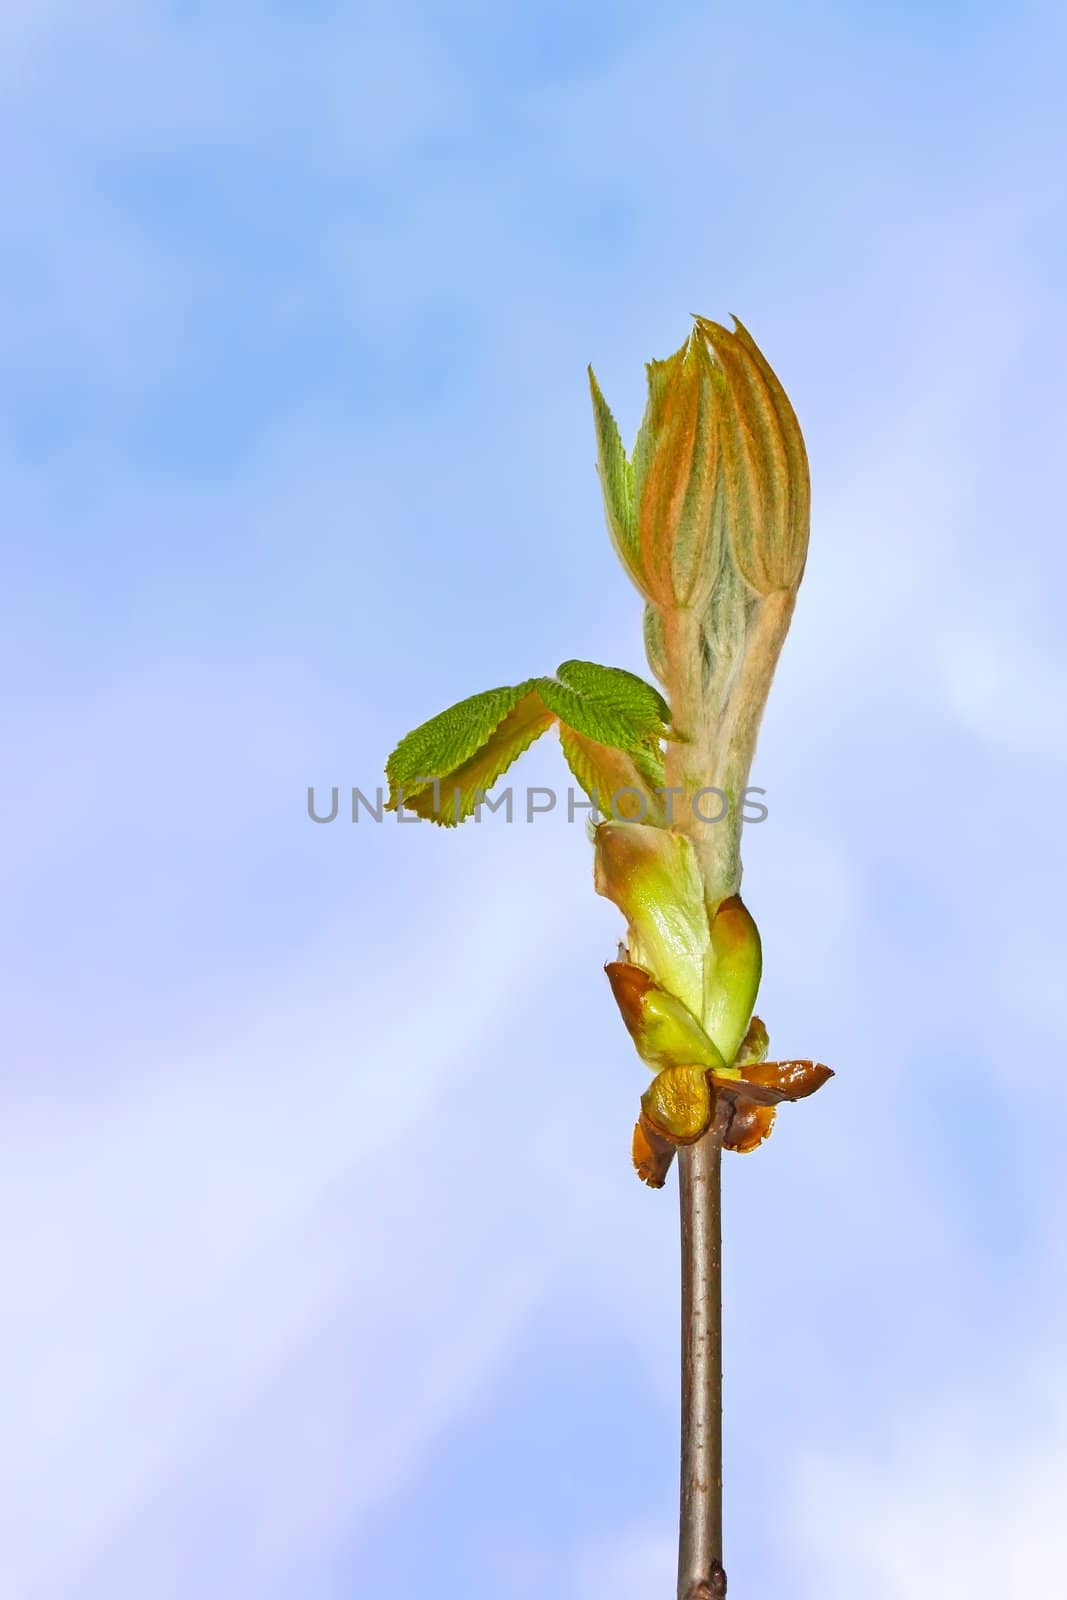 Chestnut bud with young leaves which dissolved on the background of blue sky